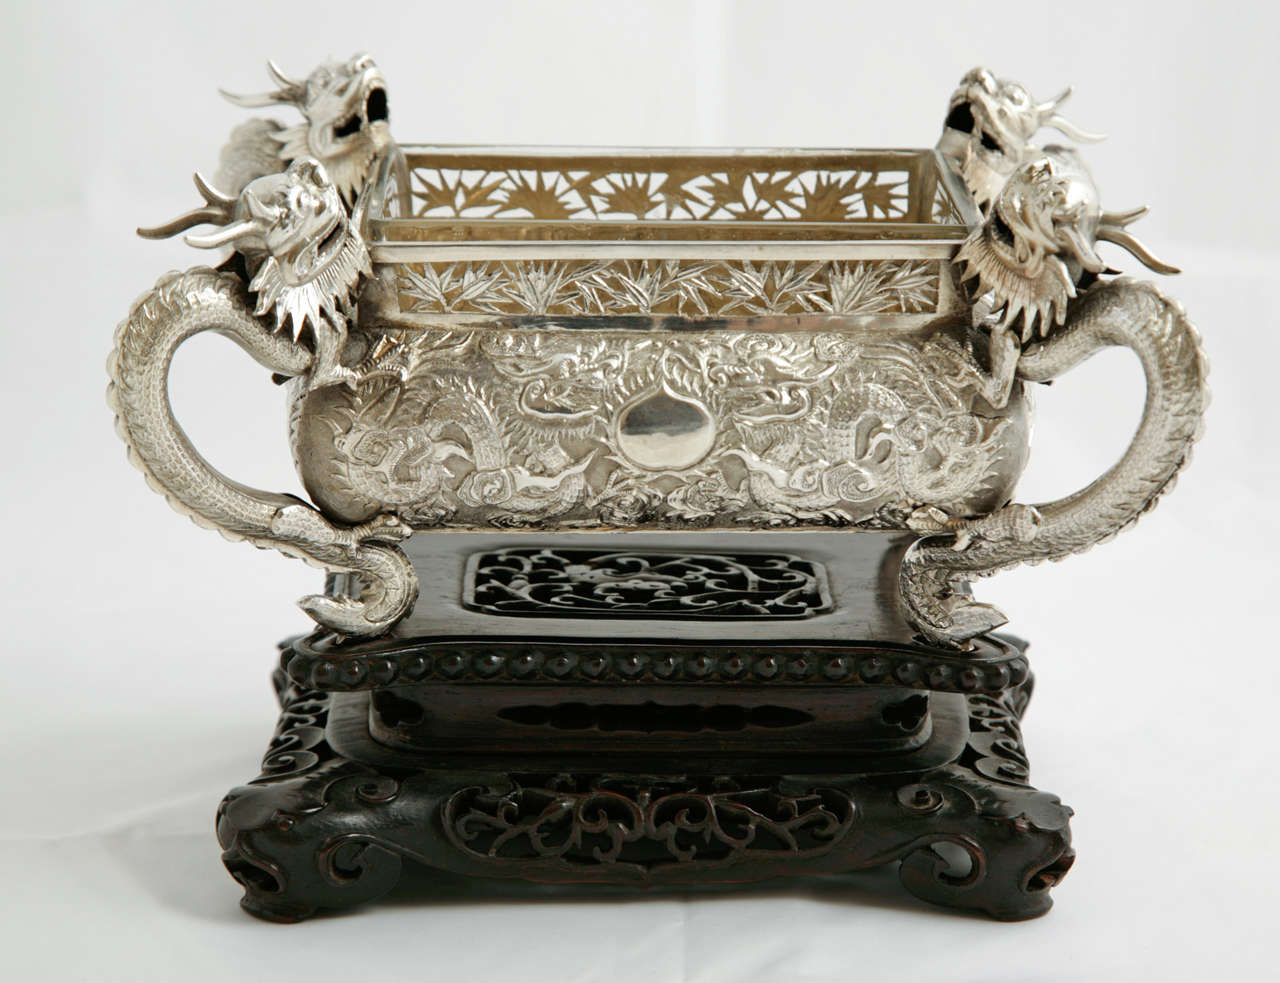 A Chinese Export Silver Jardiniere made by the firm of Hung Chong & Co. who were supplying silver to international clientele in Canton and Shanghai in the late nineteenth century.
This dish has four dragons at each corner and sits on the original